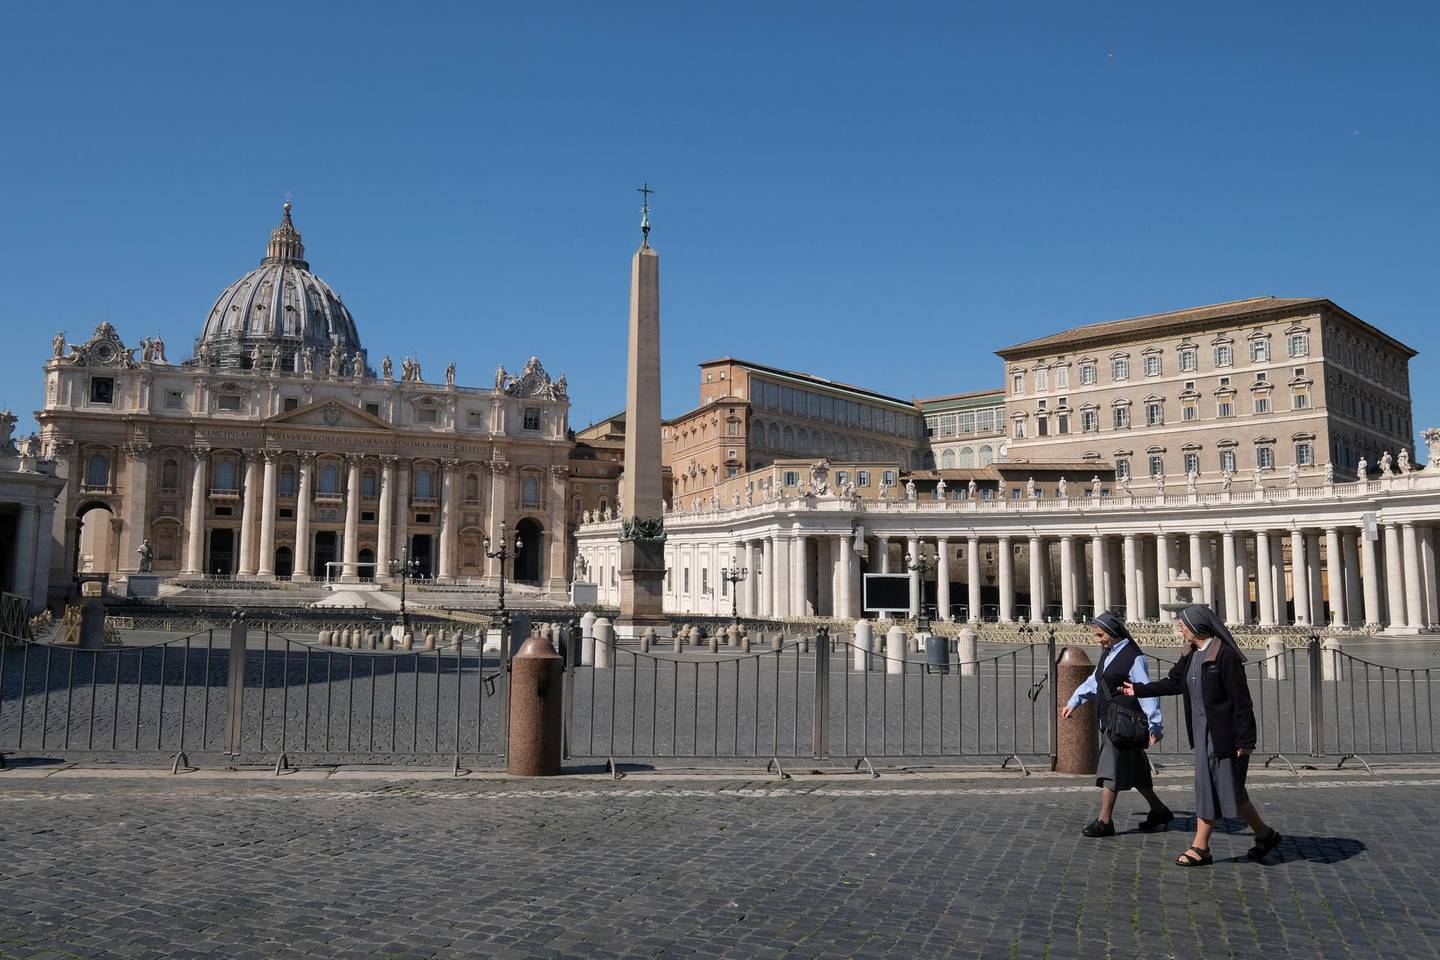 FILE PHOTO: Nuns walk past a deserted St Peter's Square on the seventh day of a lockdown due to the coronavirus in Rome, Italy, March 16, 2020. REUTERS/Crispian BalmerTwo nuns walk past a deserted St Peter’s Square/File Photo